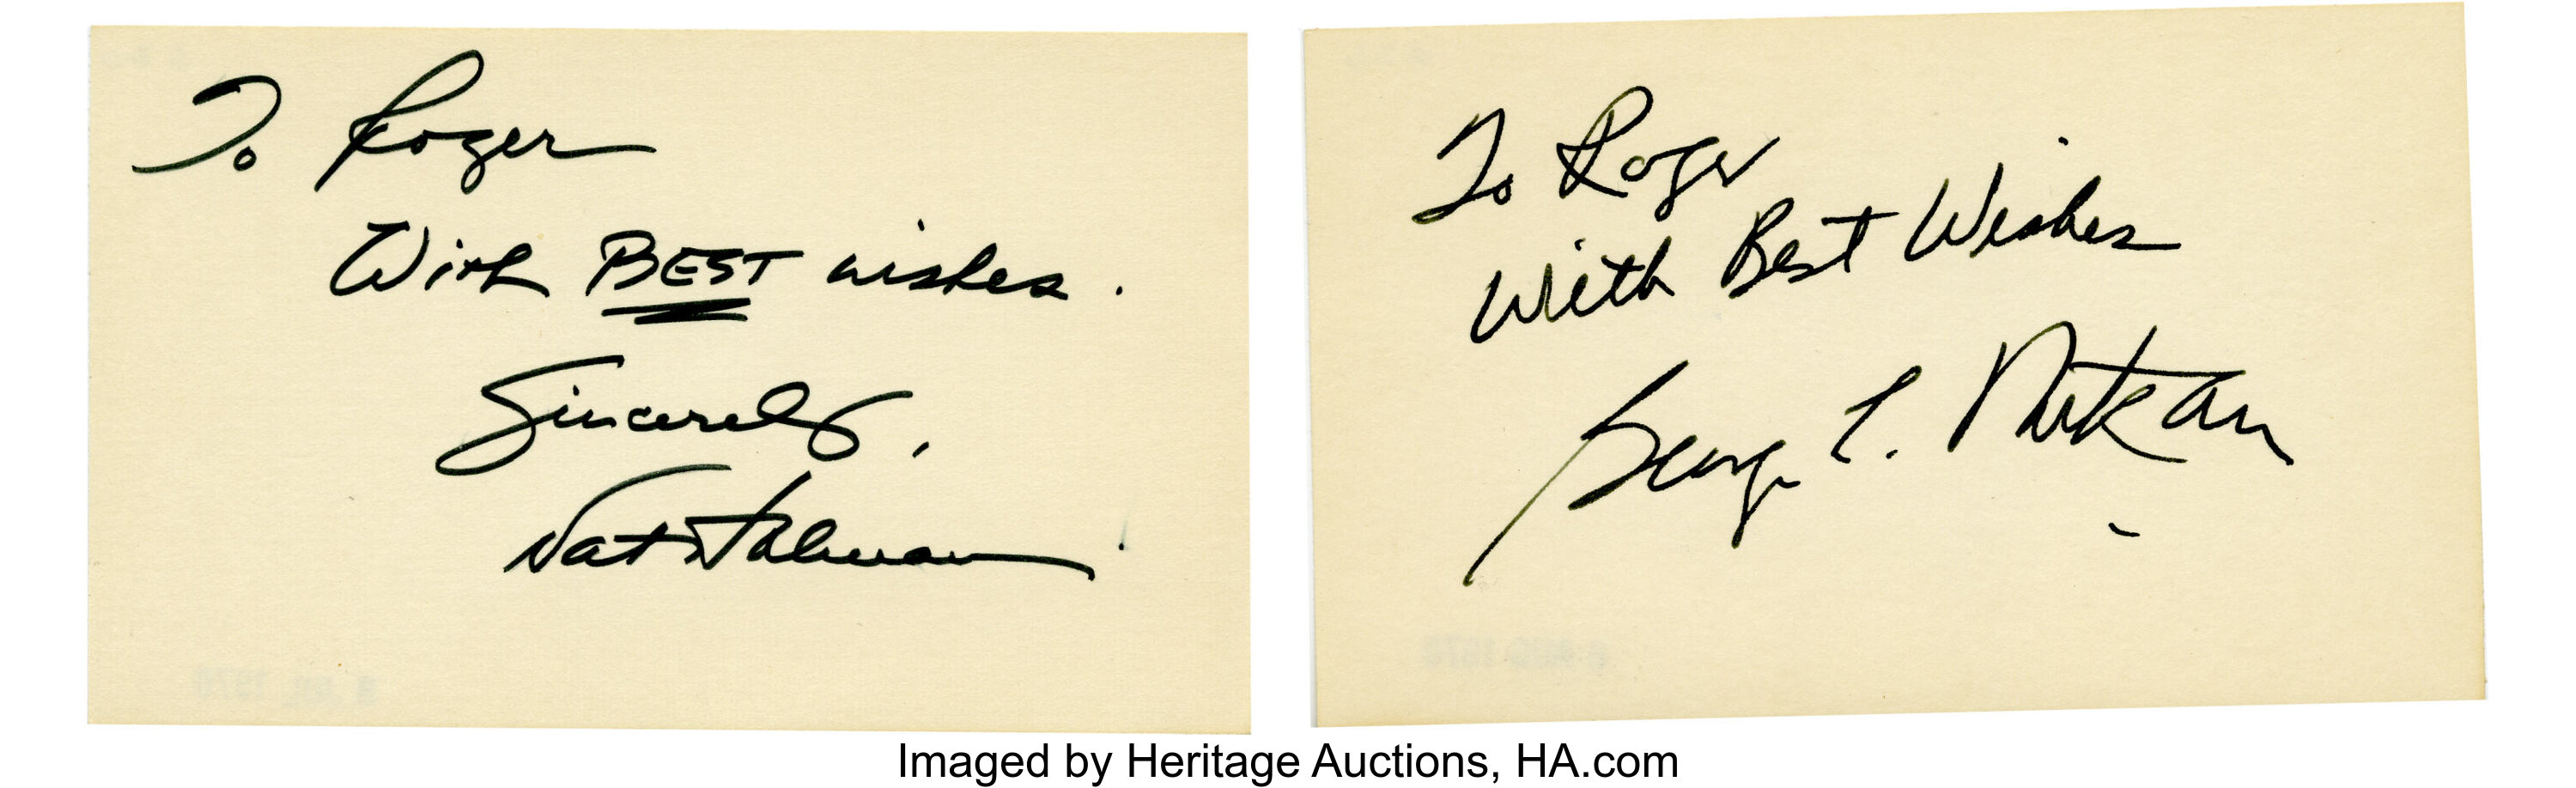 George Mikan And Nat Holman Single Signed Index Cards Lot Of 2 The Lot Heritage Auctions